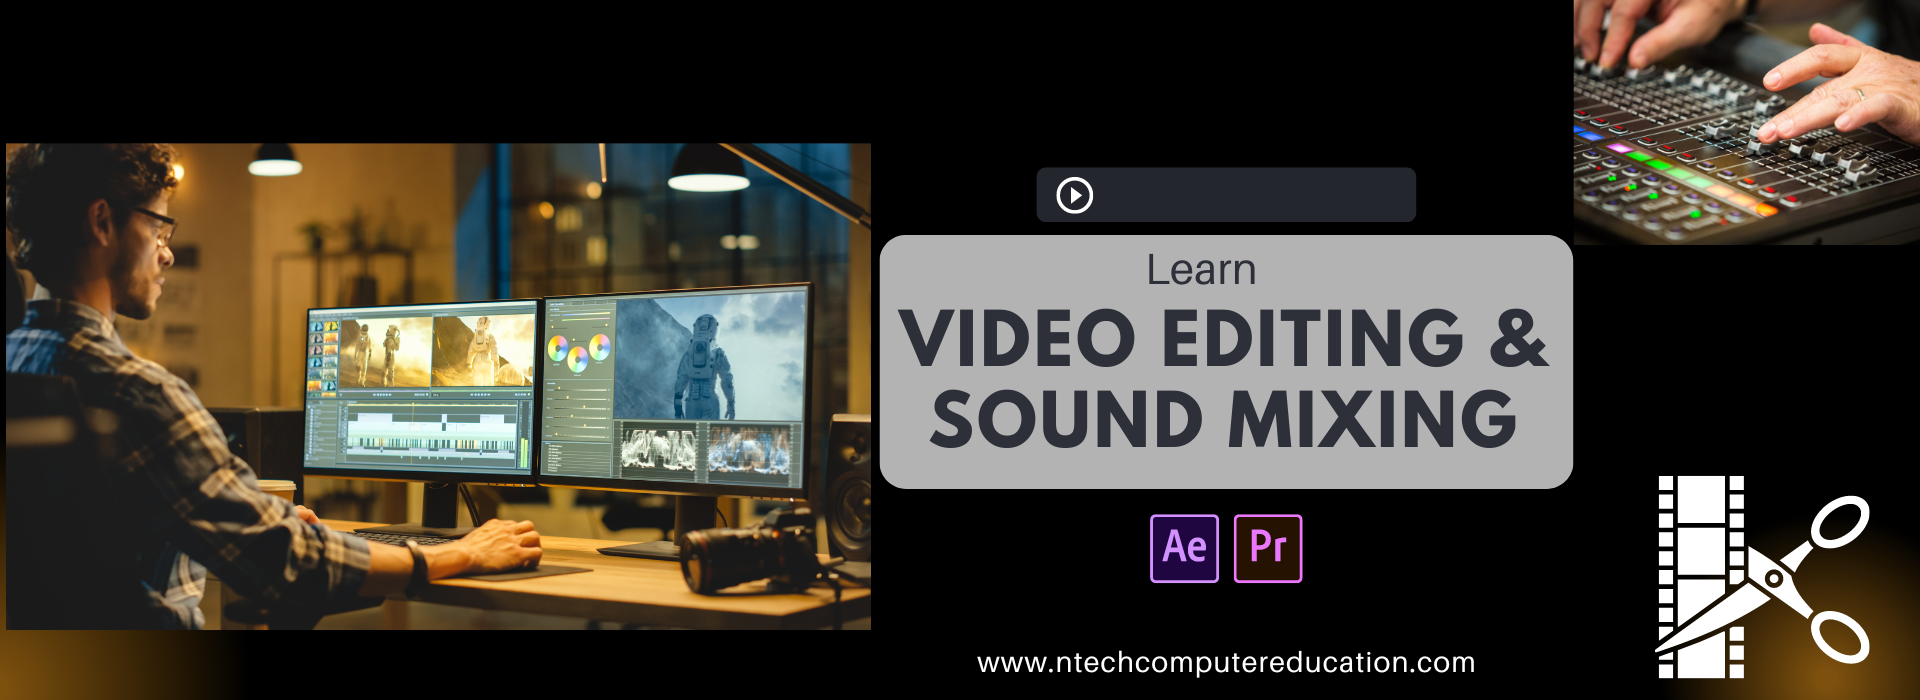 learn video editing and sound mixing in ludhiana